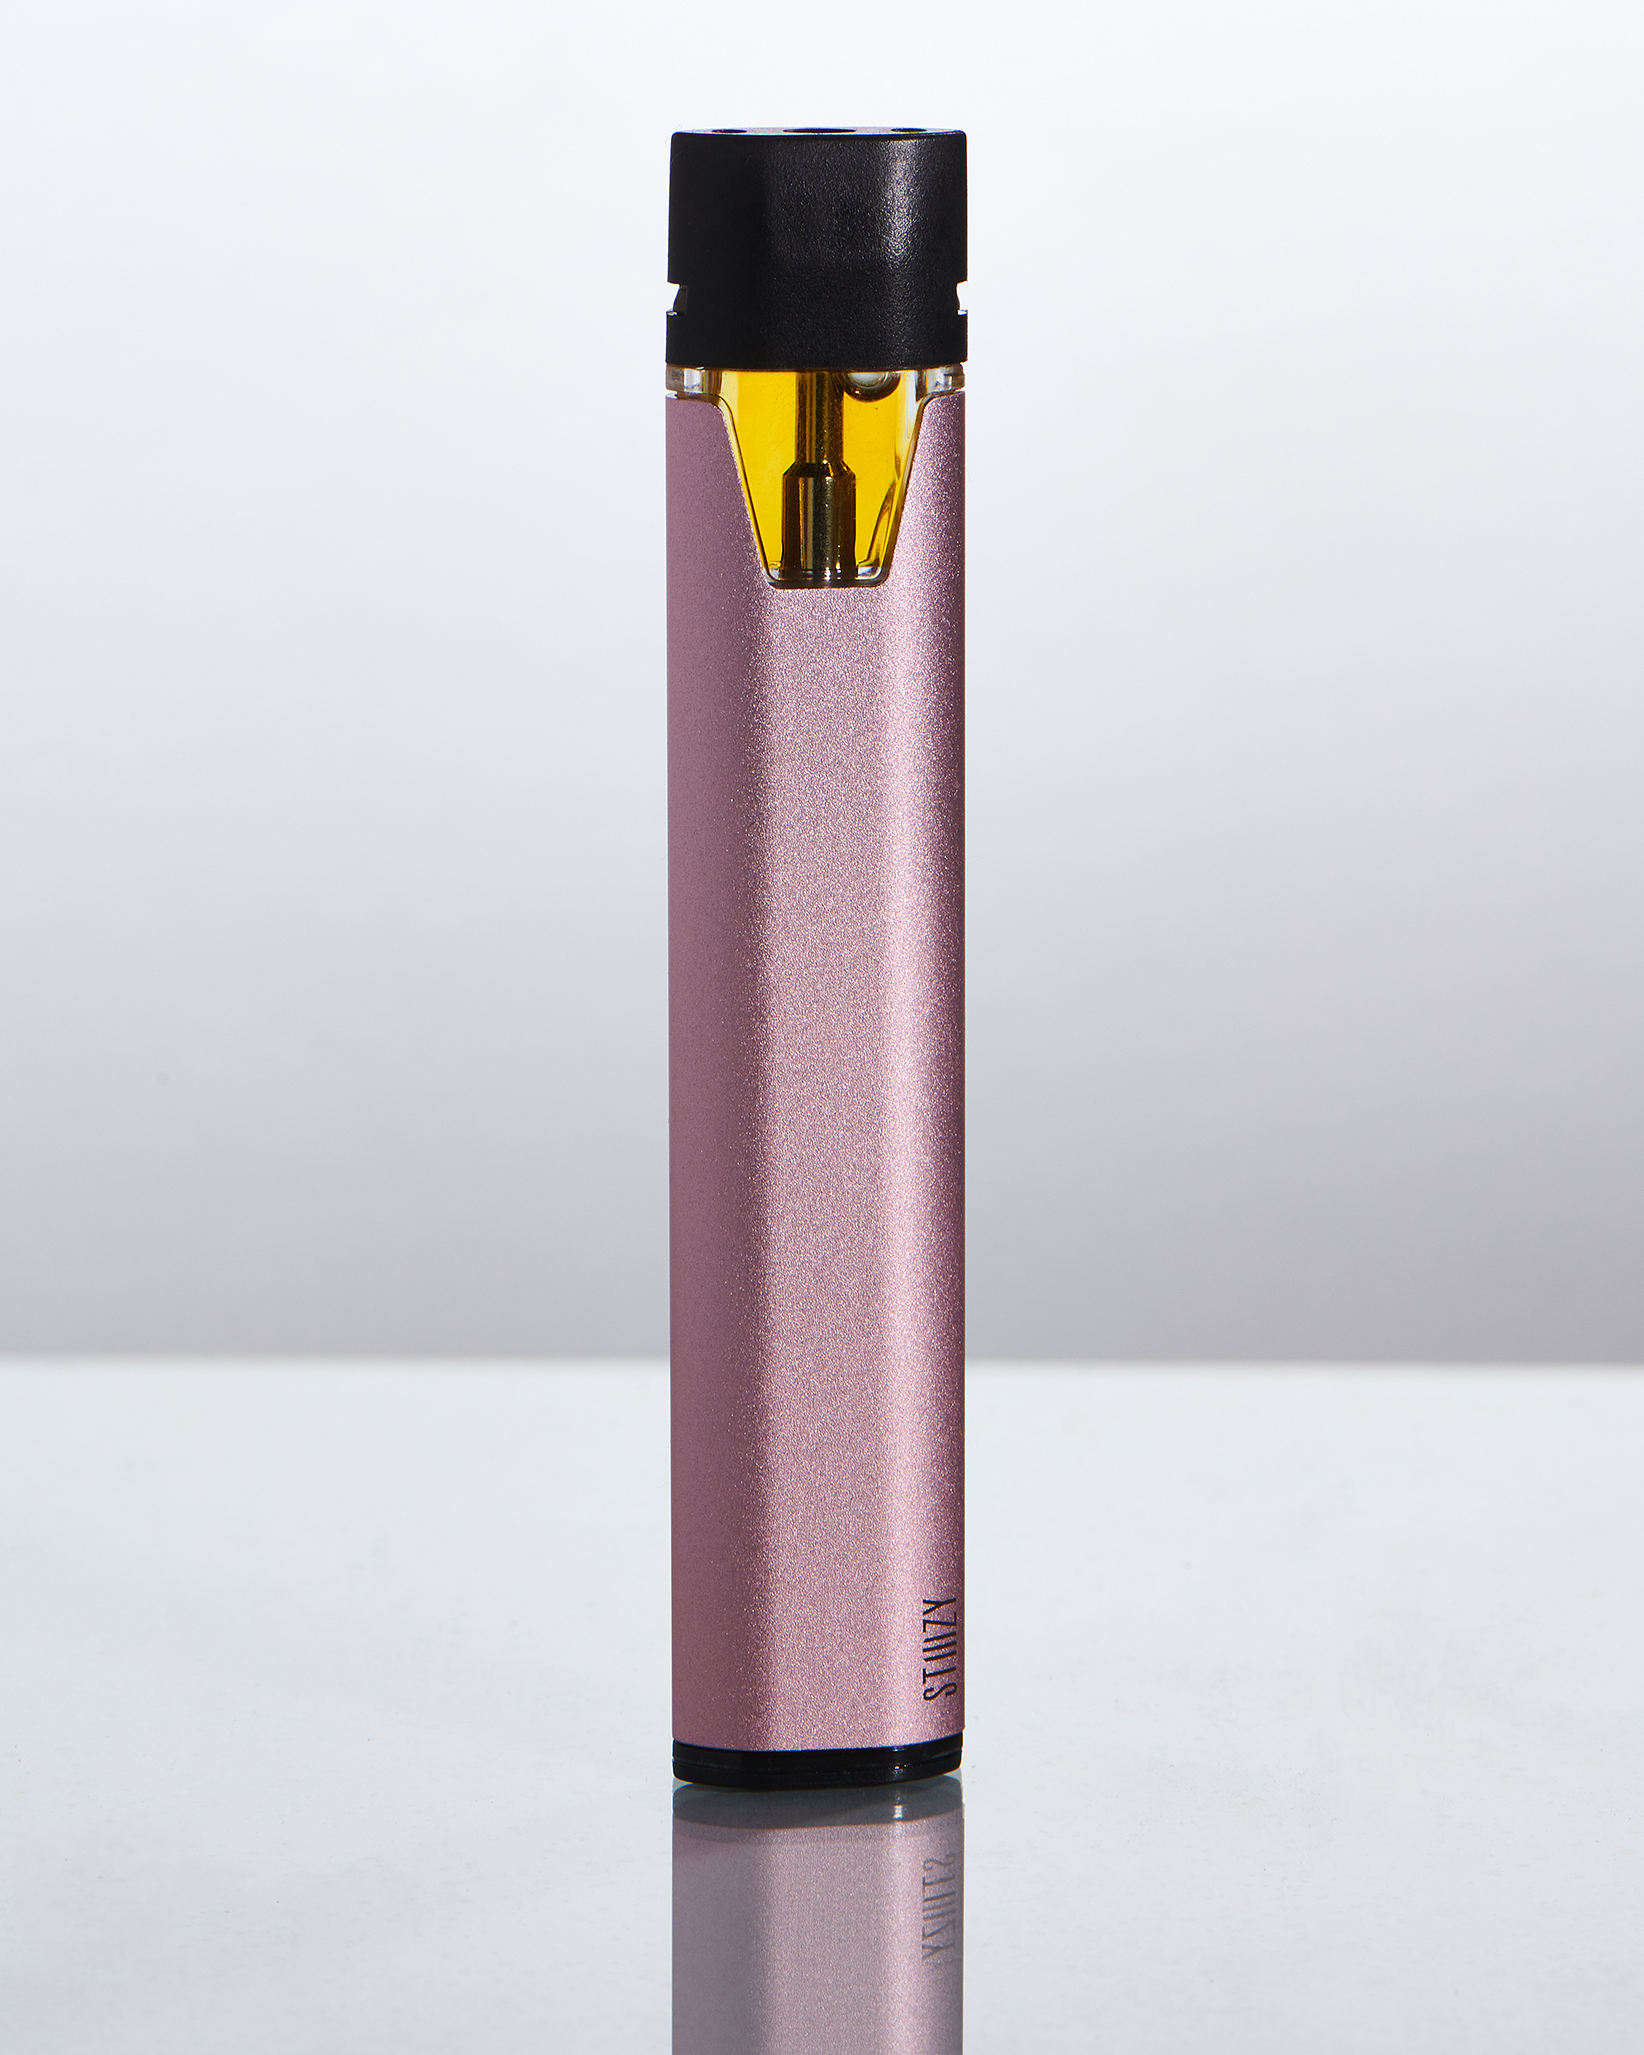 A rose-colored weed pen battery with a weed vape pod prefilled with cannabis oils stands on a gray surface.